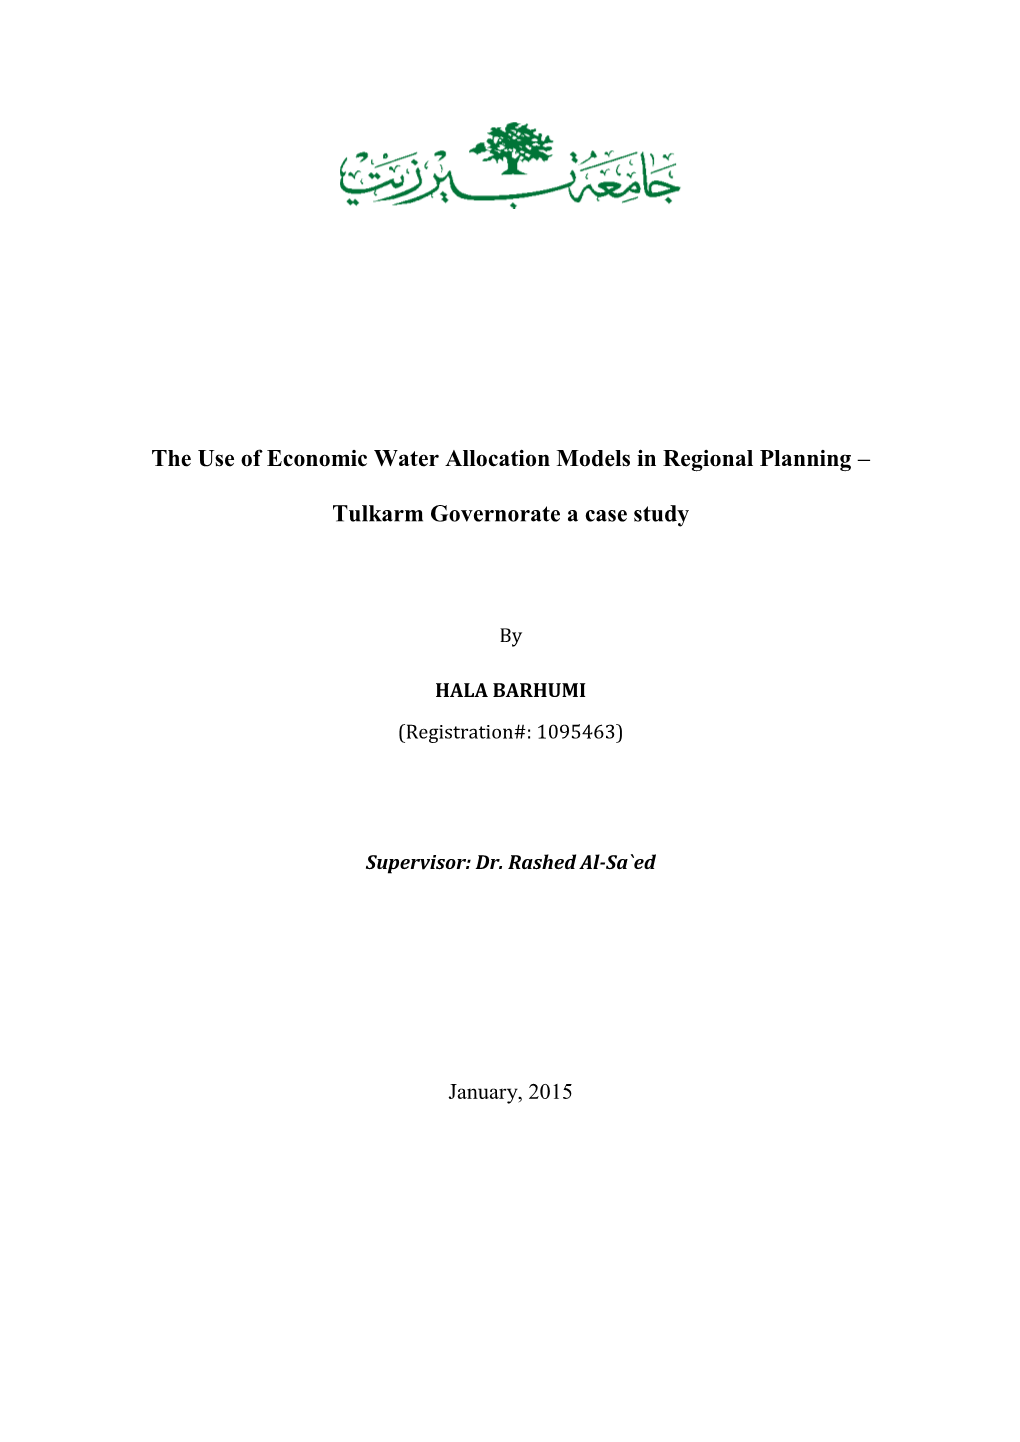 The Use of Economic Water Allocation Models in Regional Planning – Tulkarm Governorate a Case Study